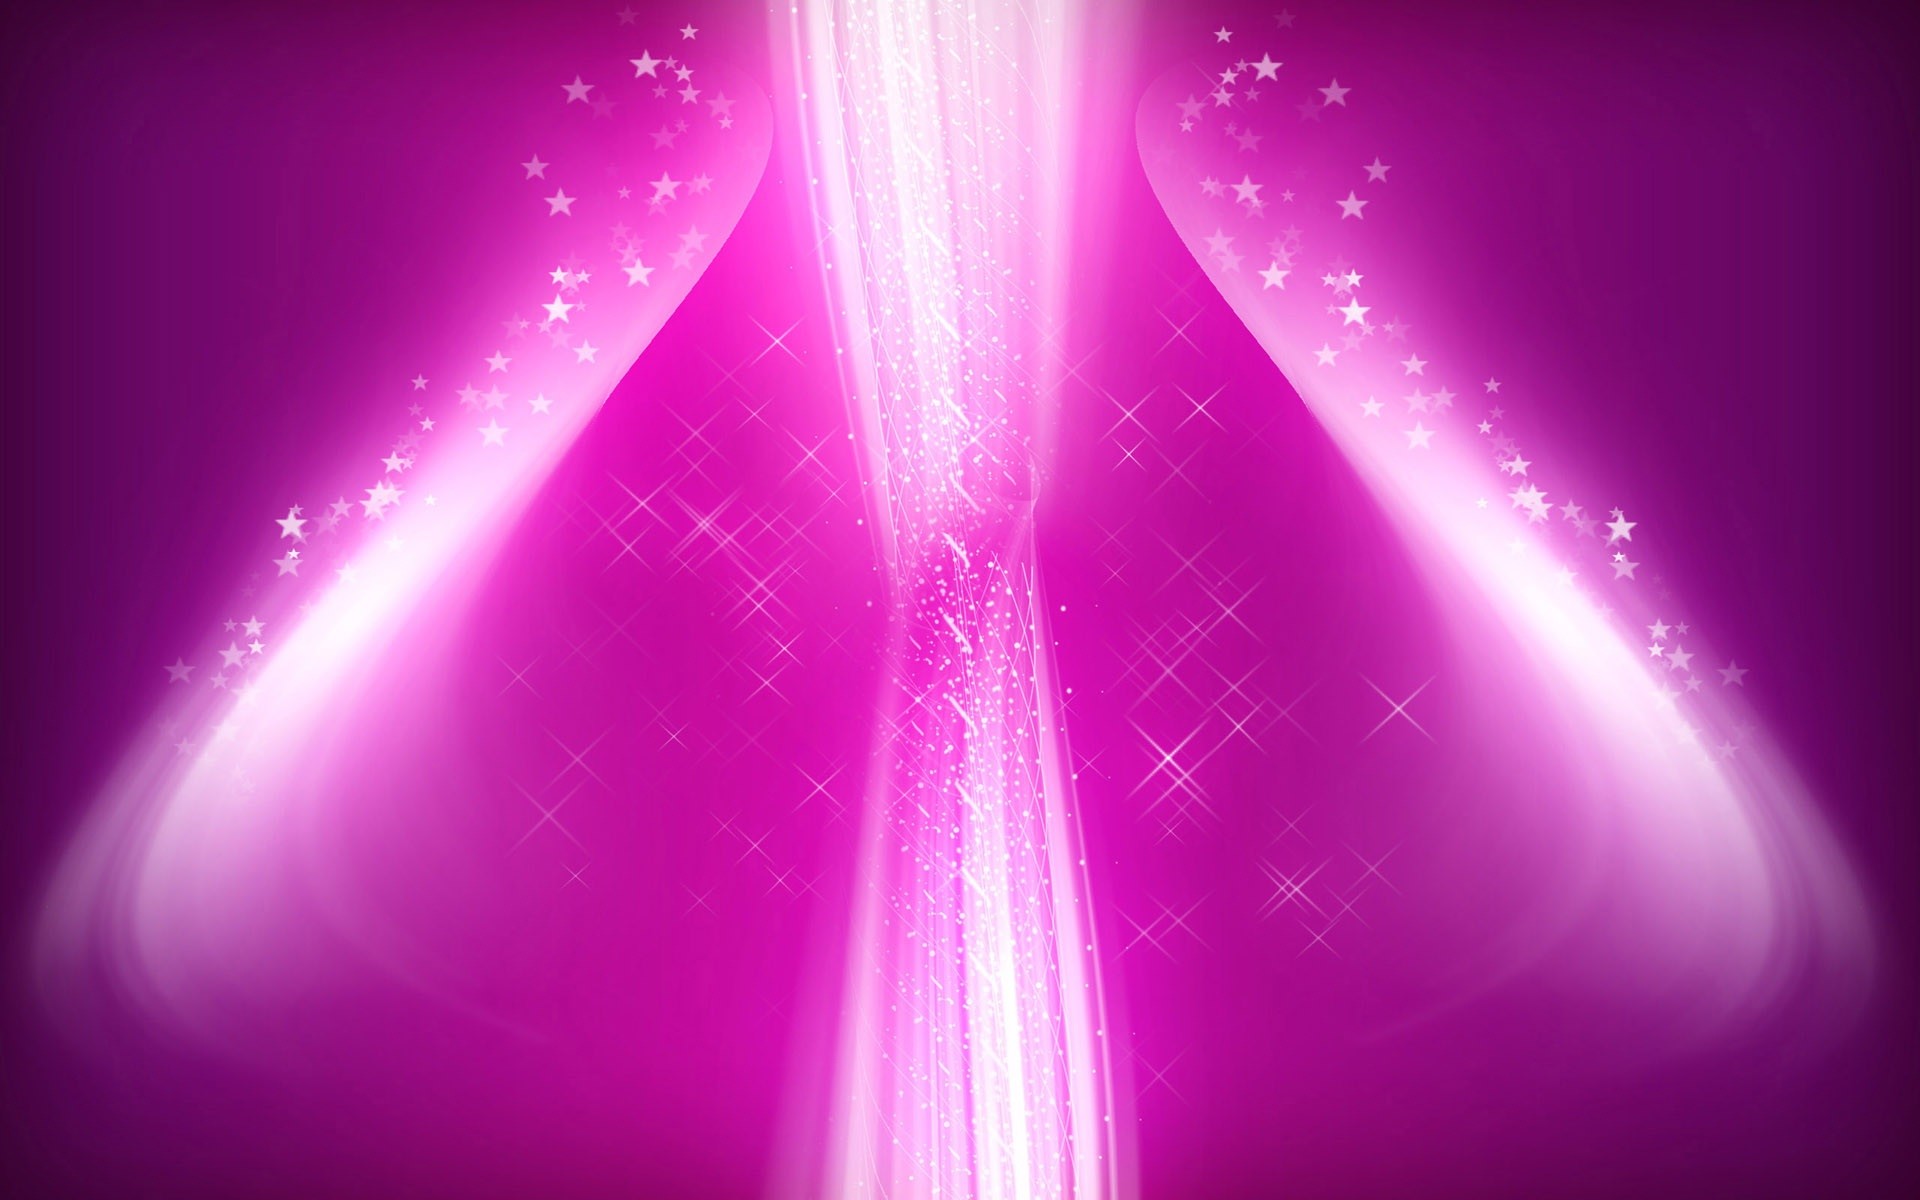 1920x1200 Cool Pink Backgrounds Wallpapers - http://hdwallpapersf.com/cool-pink